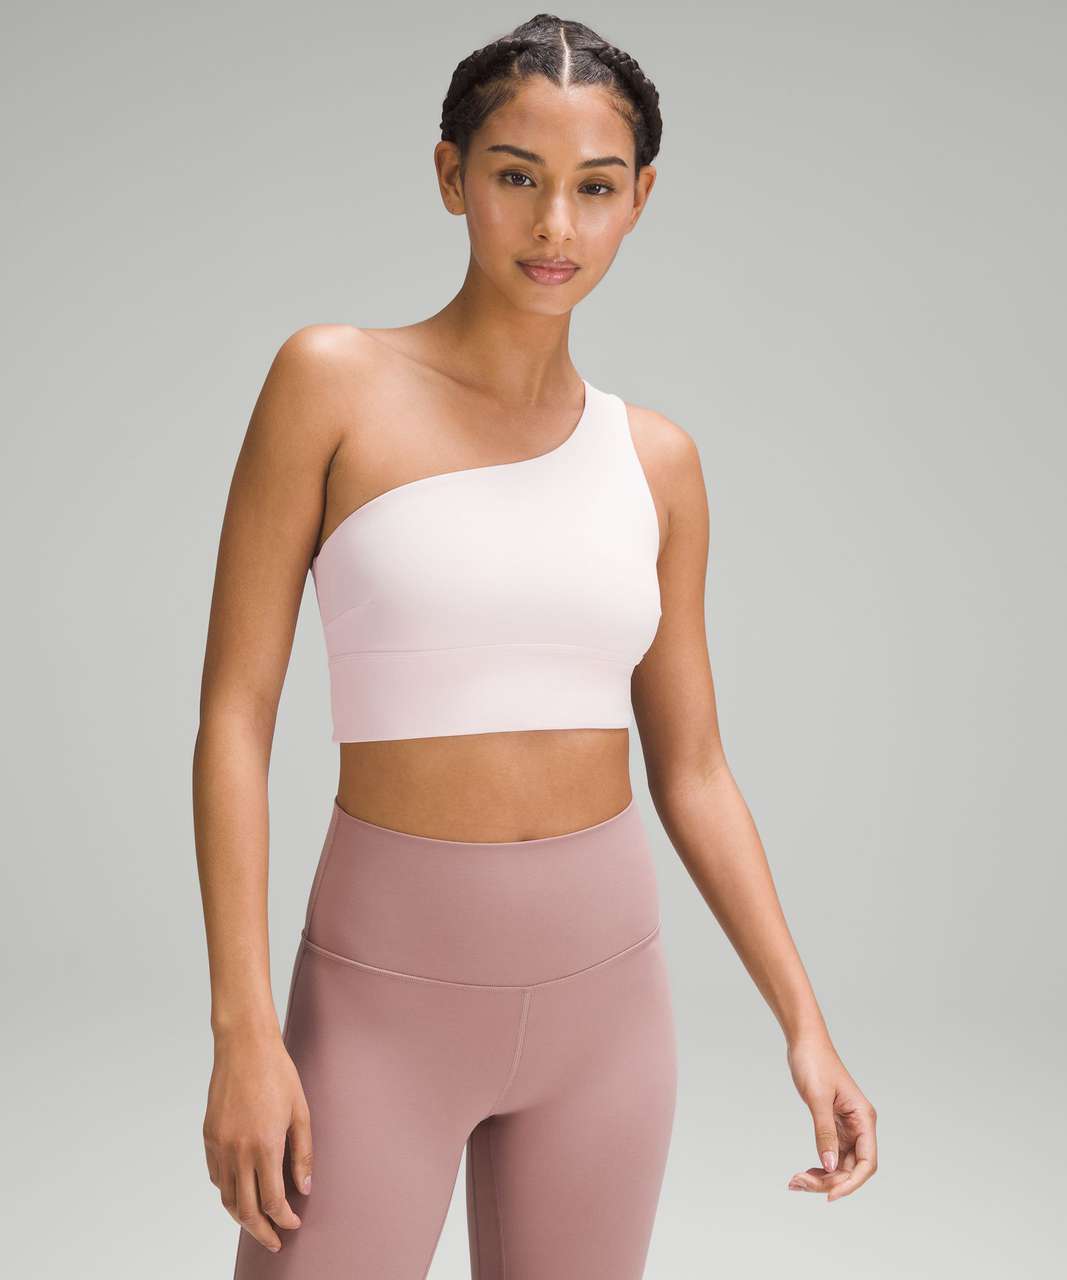 Tall person fit, align asymmetrical bra (c/d cup, size 10, flush pink)  hotty hot HR 4” (size 6, strawberry milkshake) and paired with EBB (orange  frappe) : r/lululemon